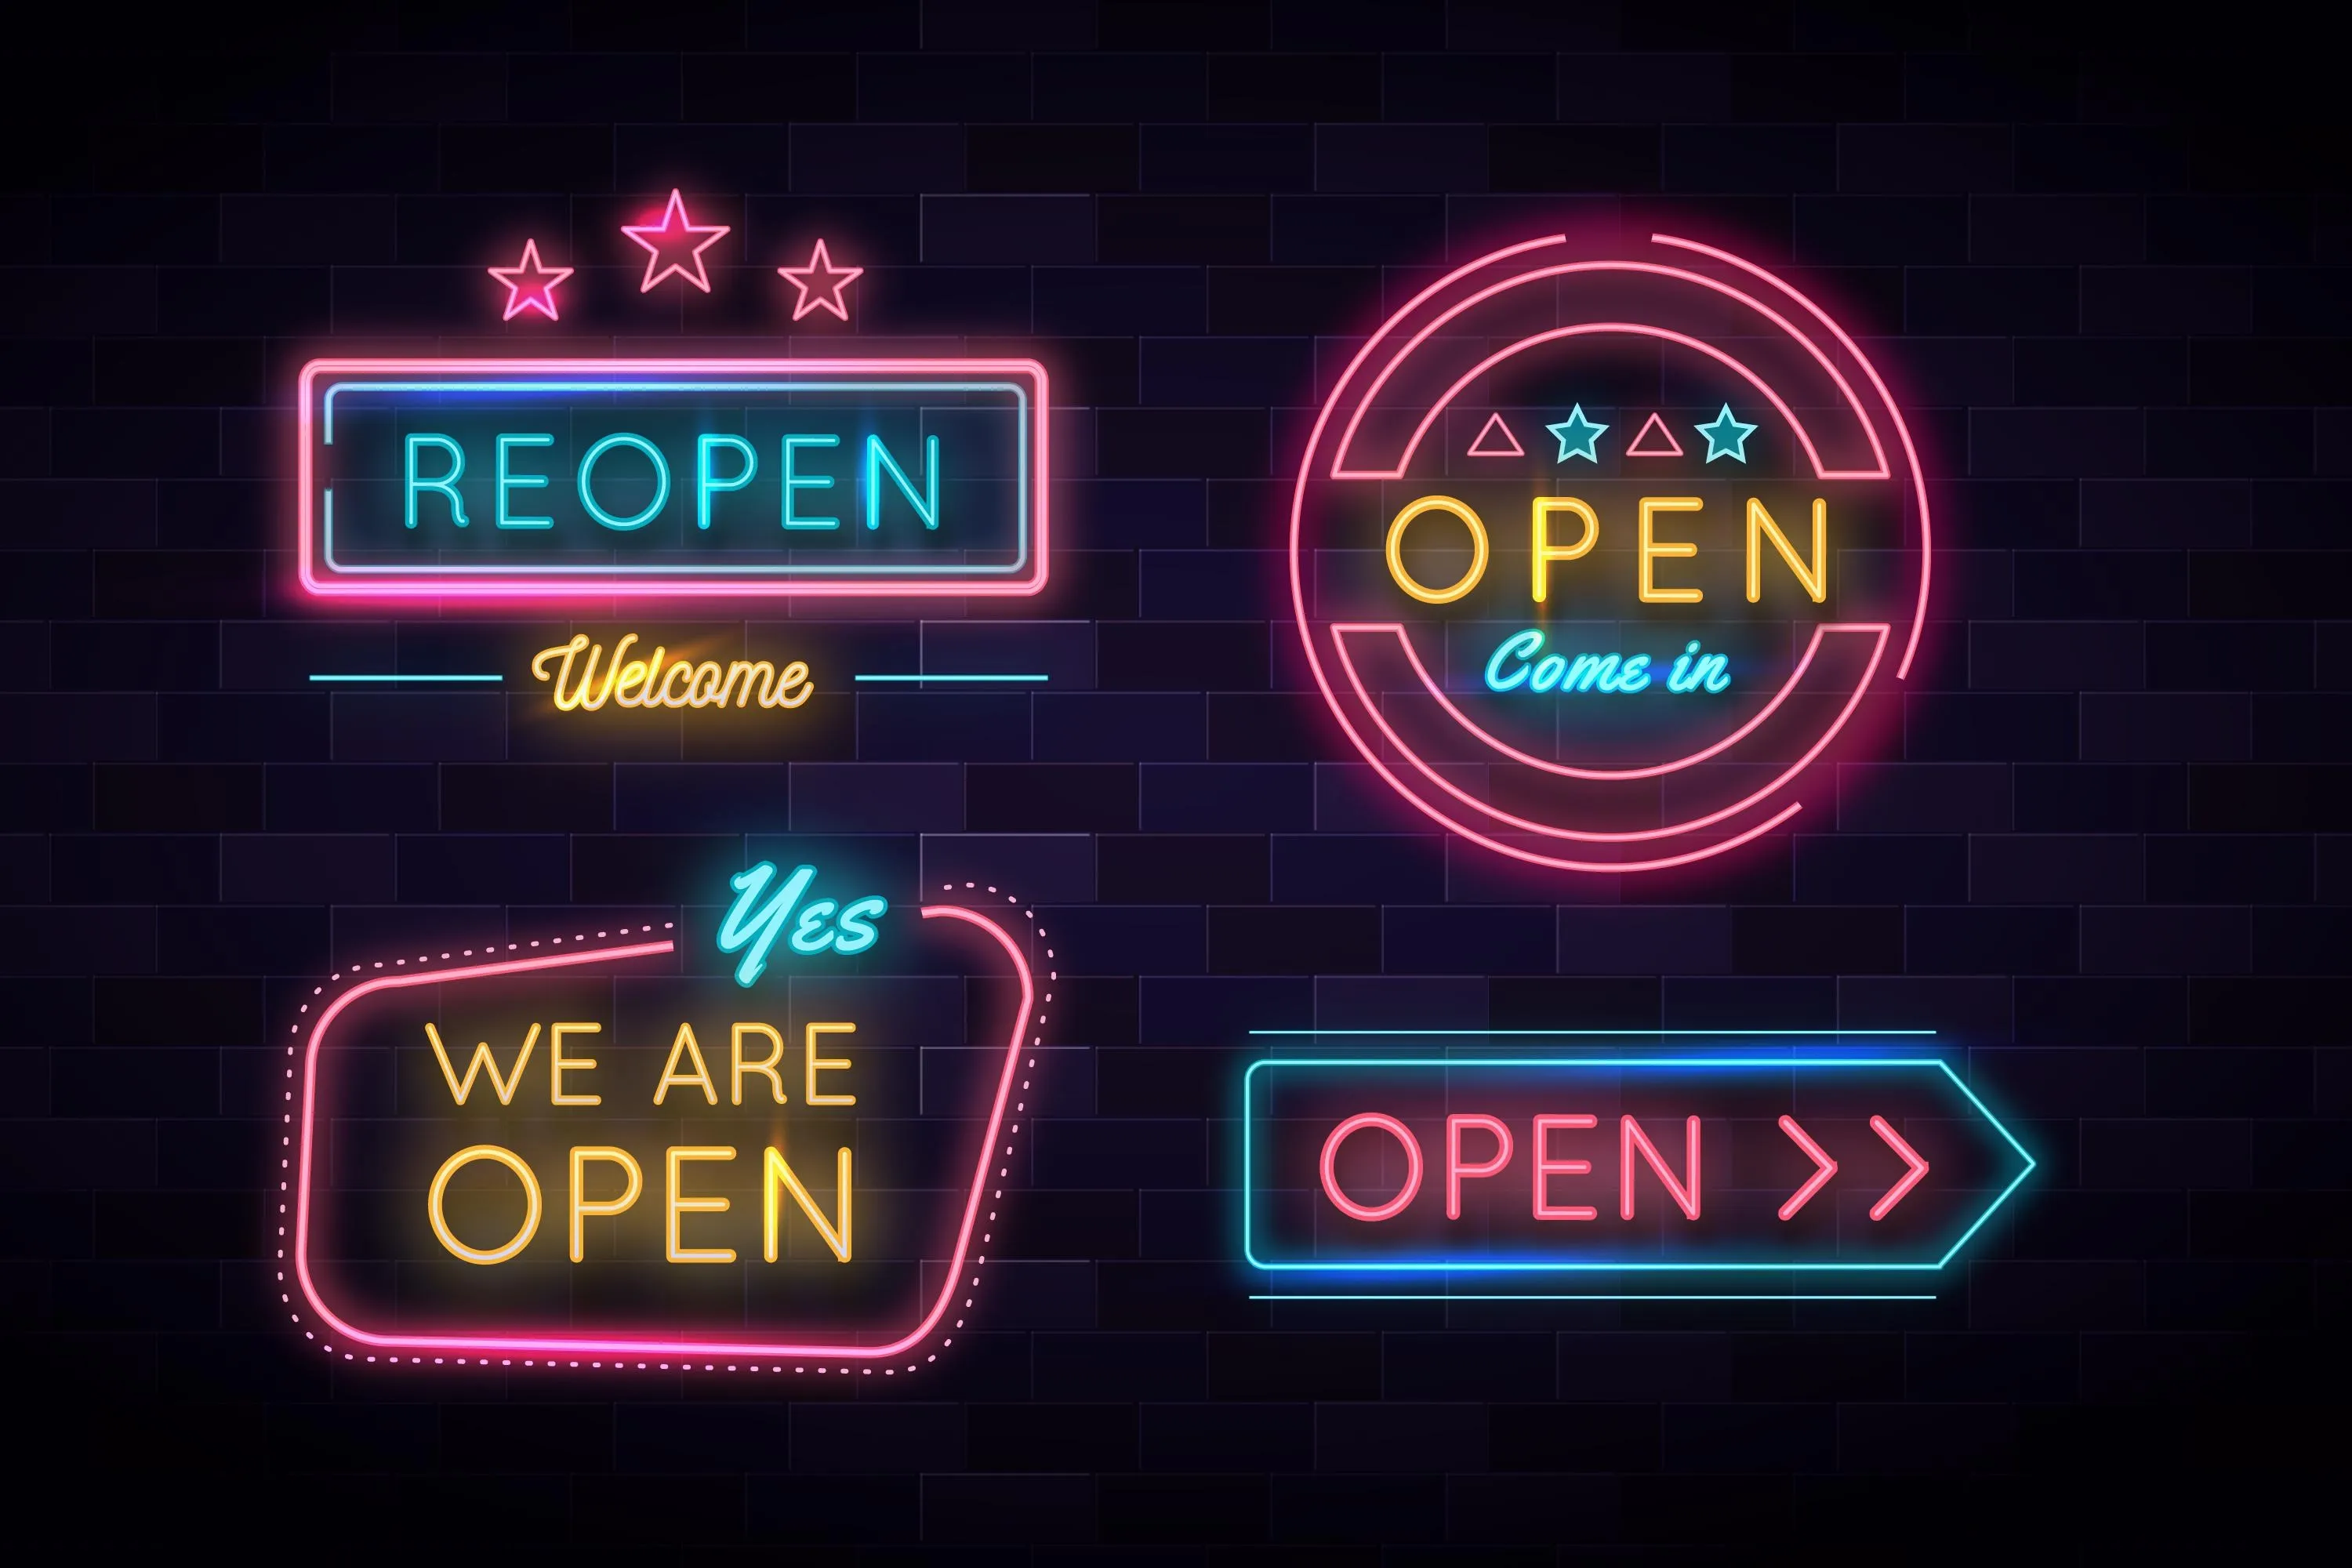 We are open and back in business neon light sign